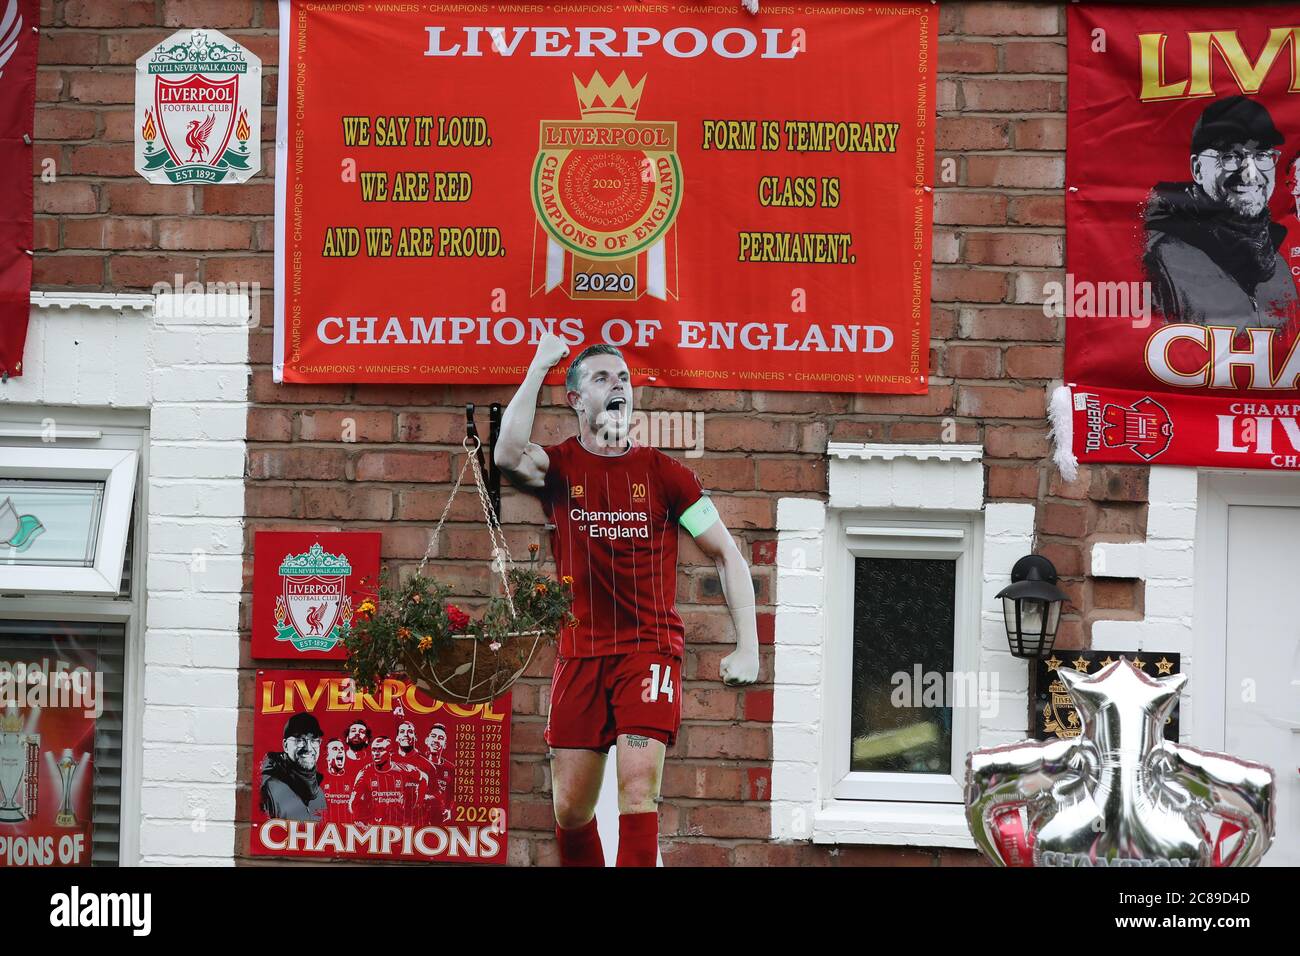 A house in Merseyside, Liverpool decorated in Liverpool colours